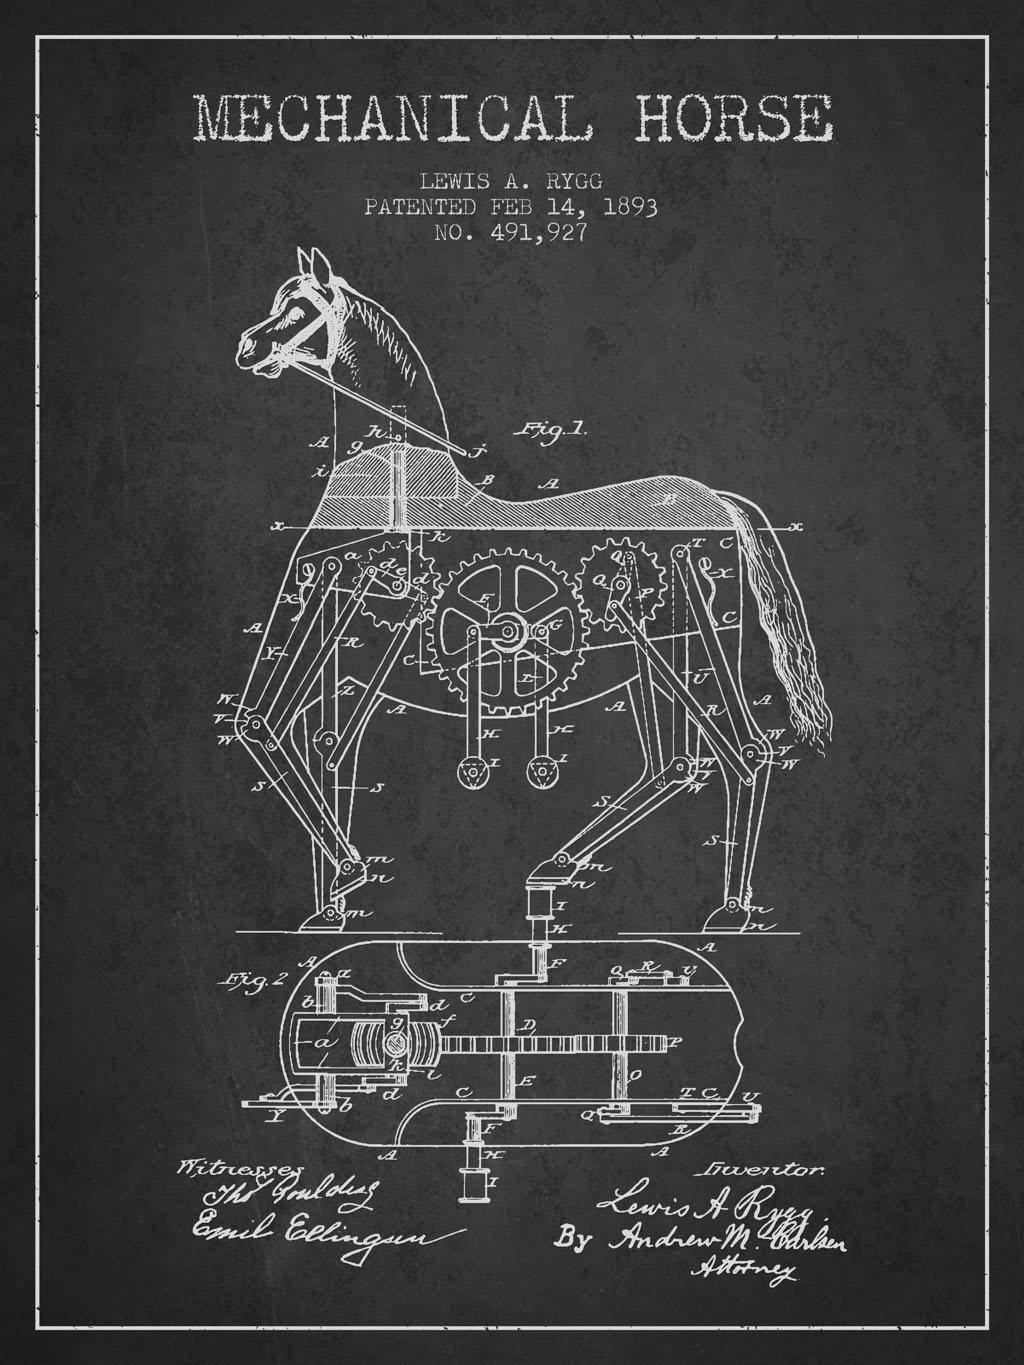 A vintage Mechanical Horse Patent Drawing From 1893 on Dark grunge background.